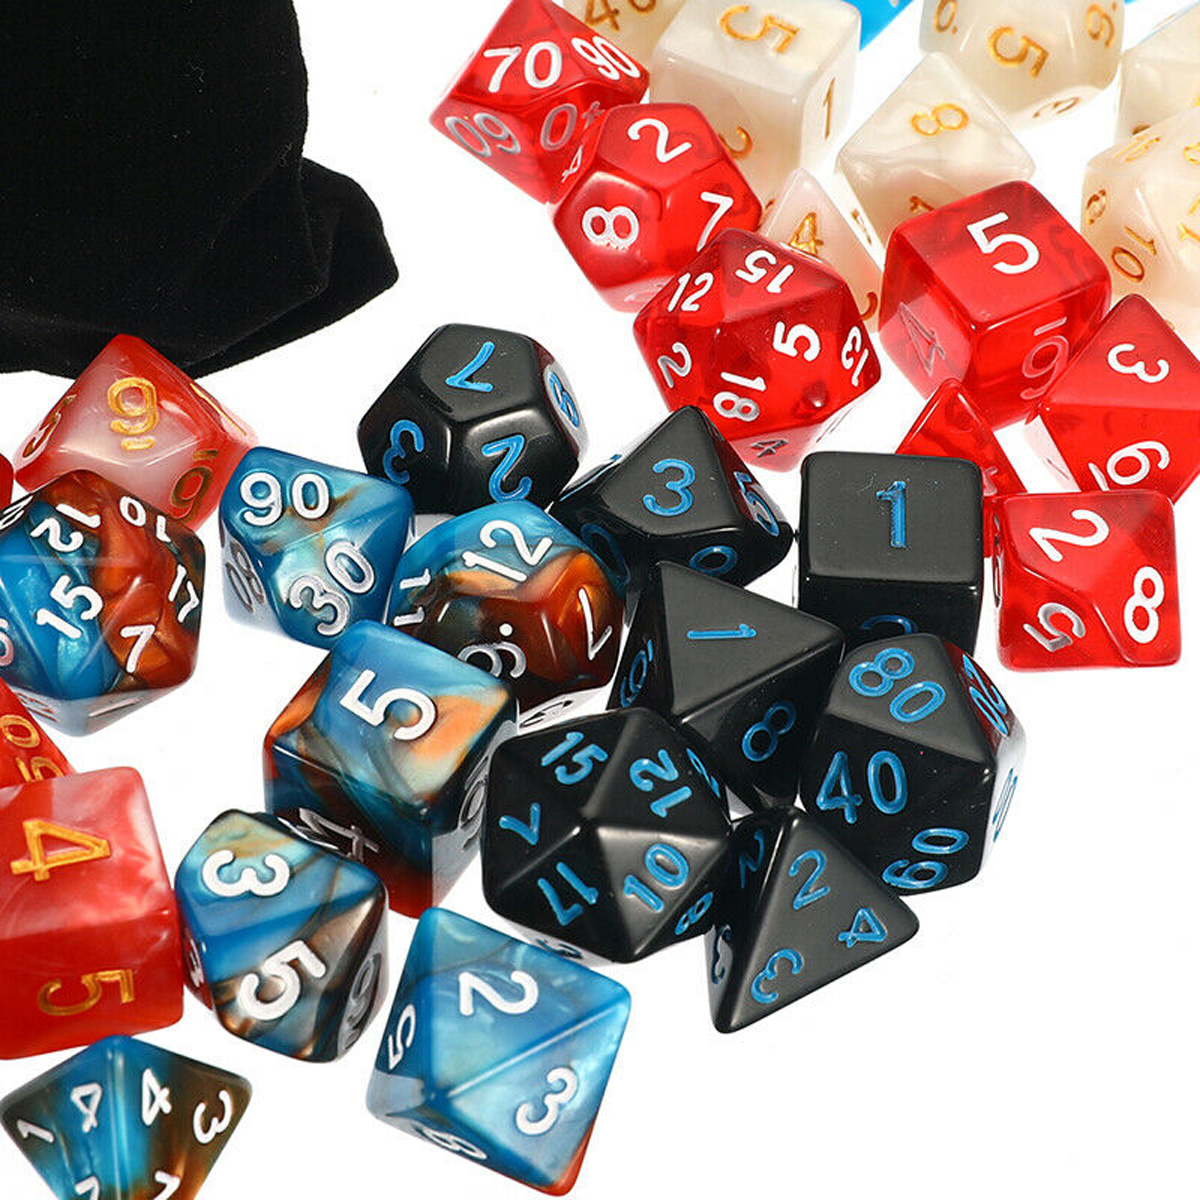 105-Pcs-Dice-Set-Polyhedral-Dices-7-Color-Role-Playing-Table-Game-With-Cloth-Game-Multi-sied-Dice-1574100-5